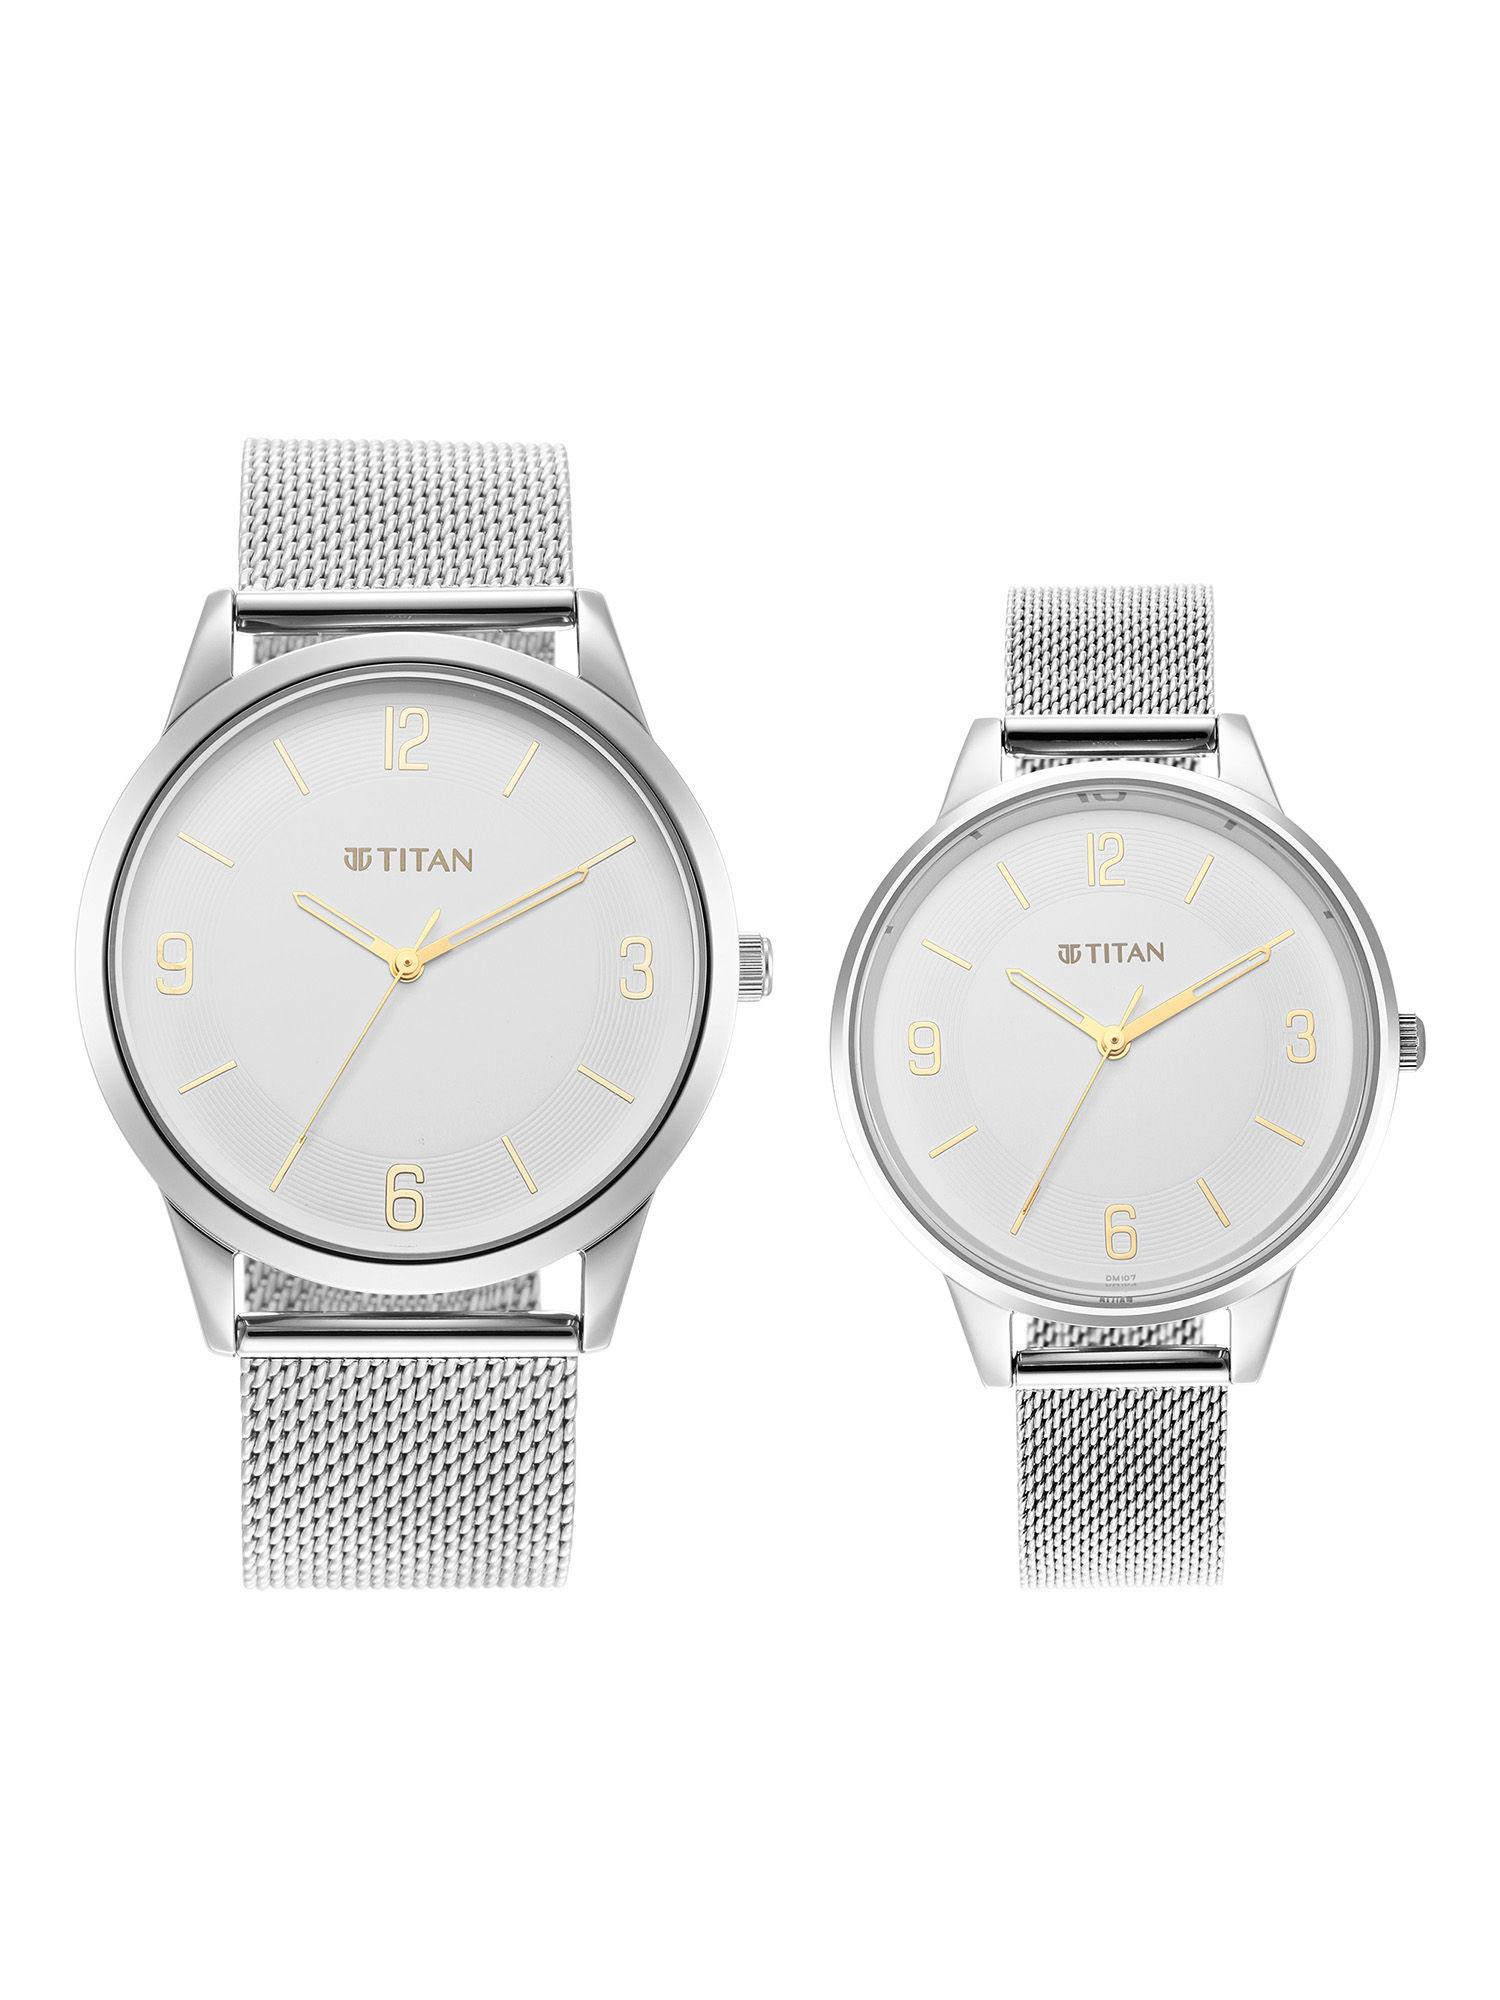 white dial analog watch for couple (18062648sm01)